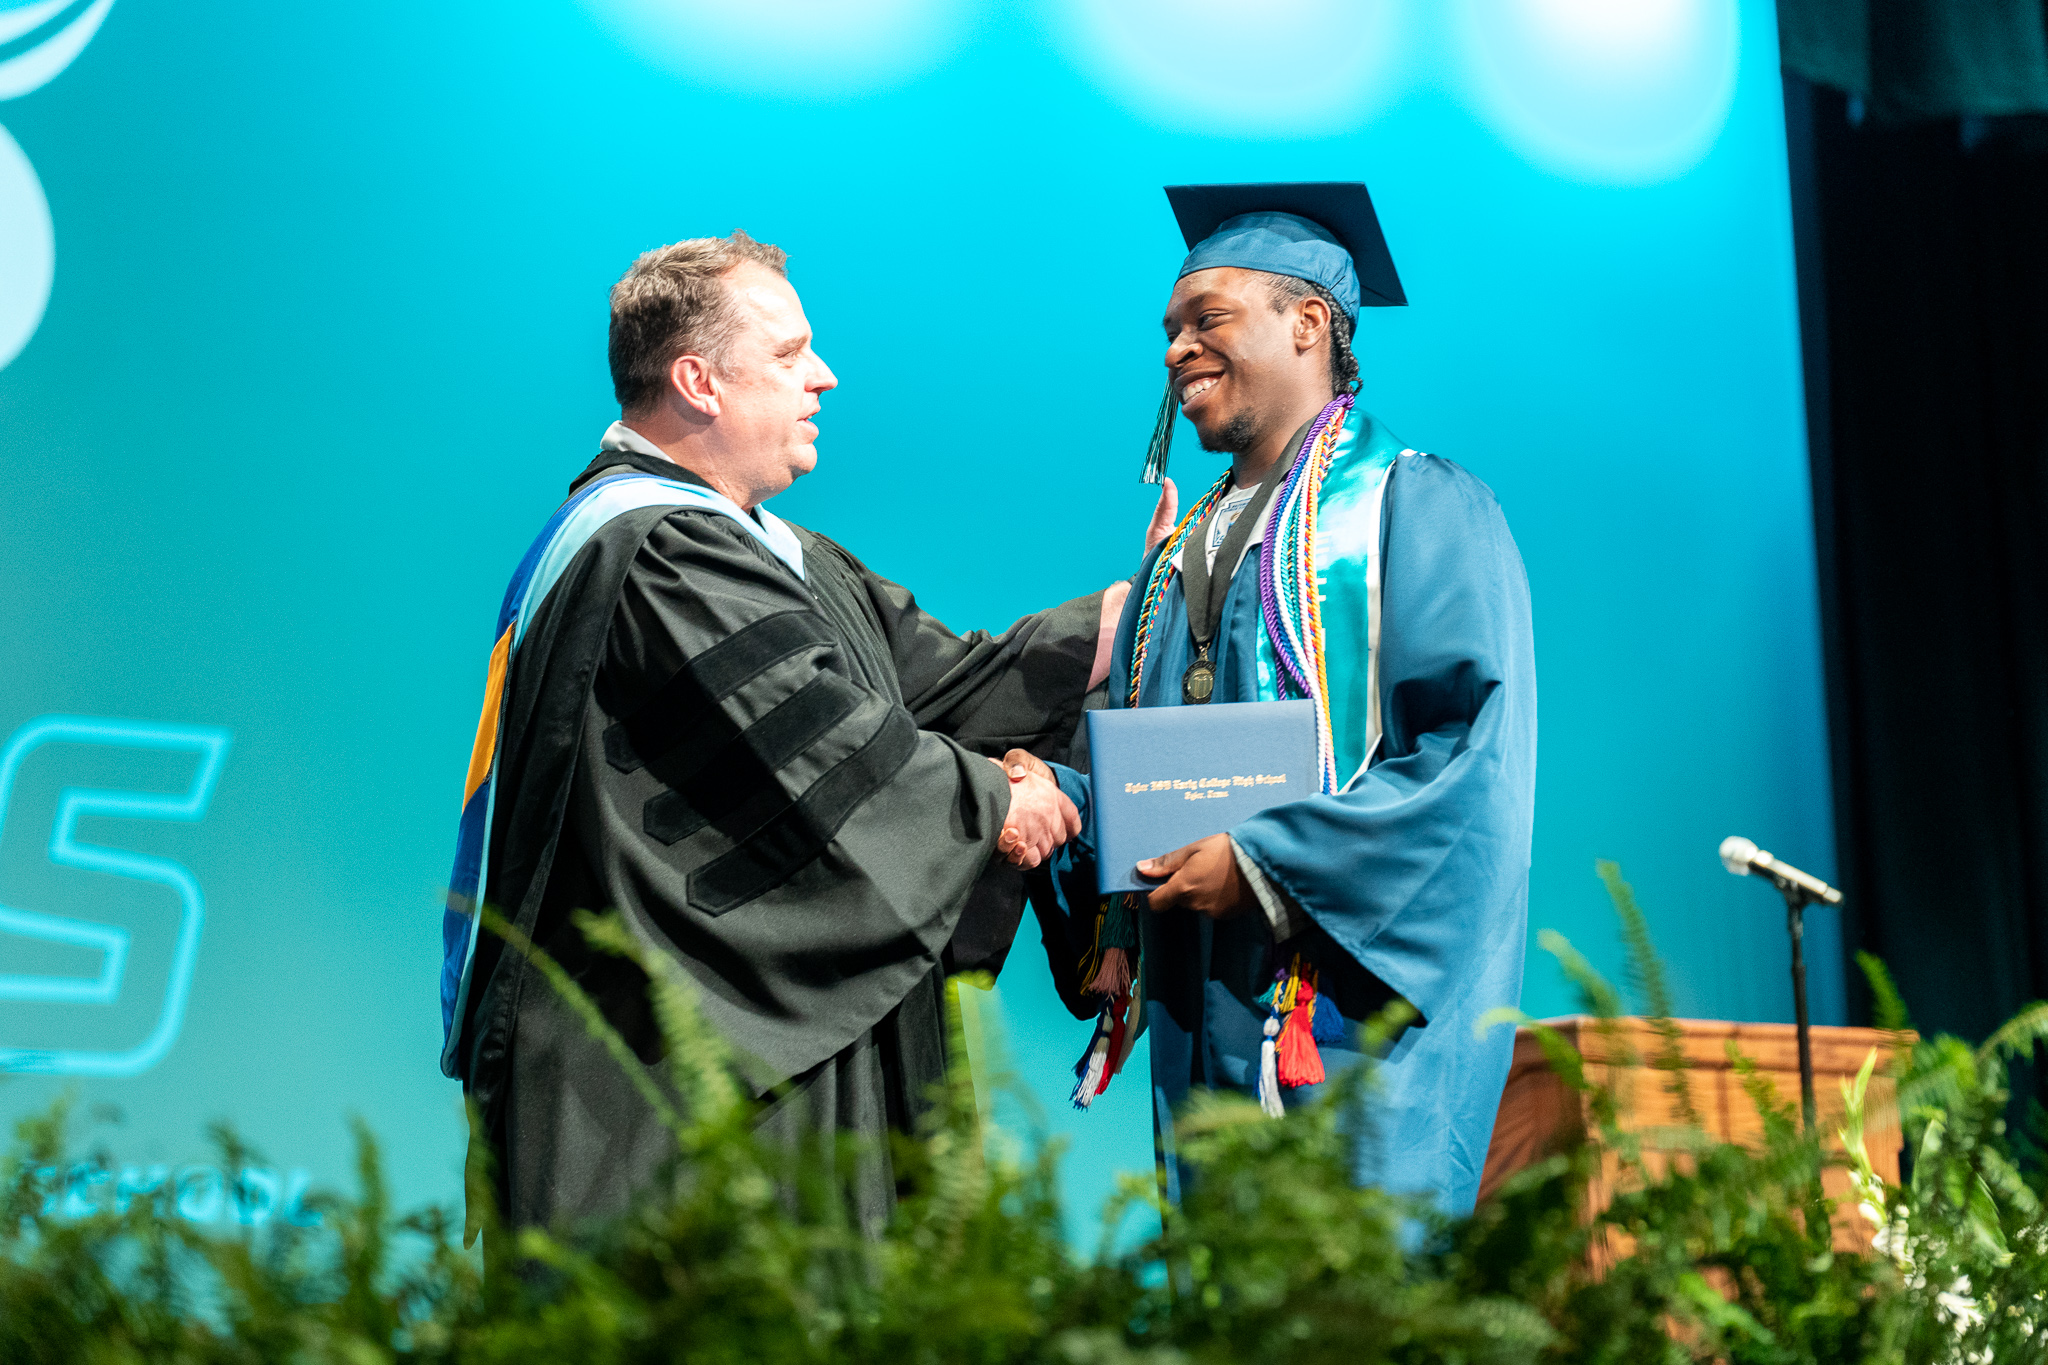 Student and superintendent shaking hands at Early College High School Graduation.